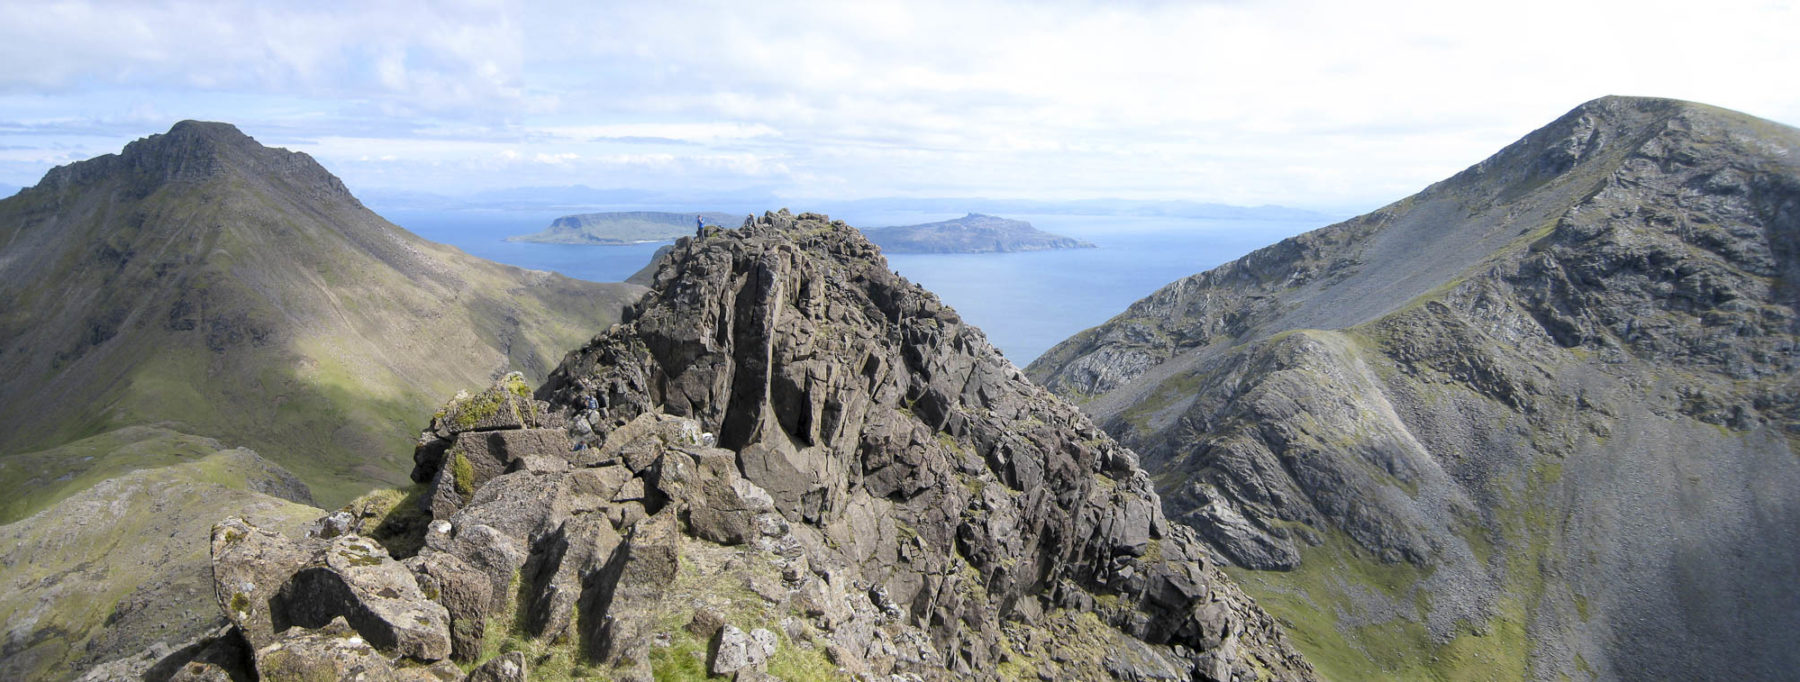 Tralleval Panorama, isle of Rum - looking out over three peaks to the Isle of Eigg and the mainland